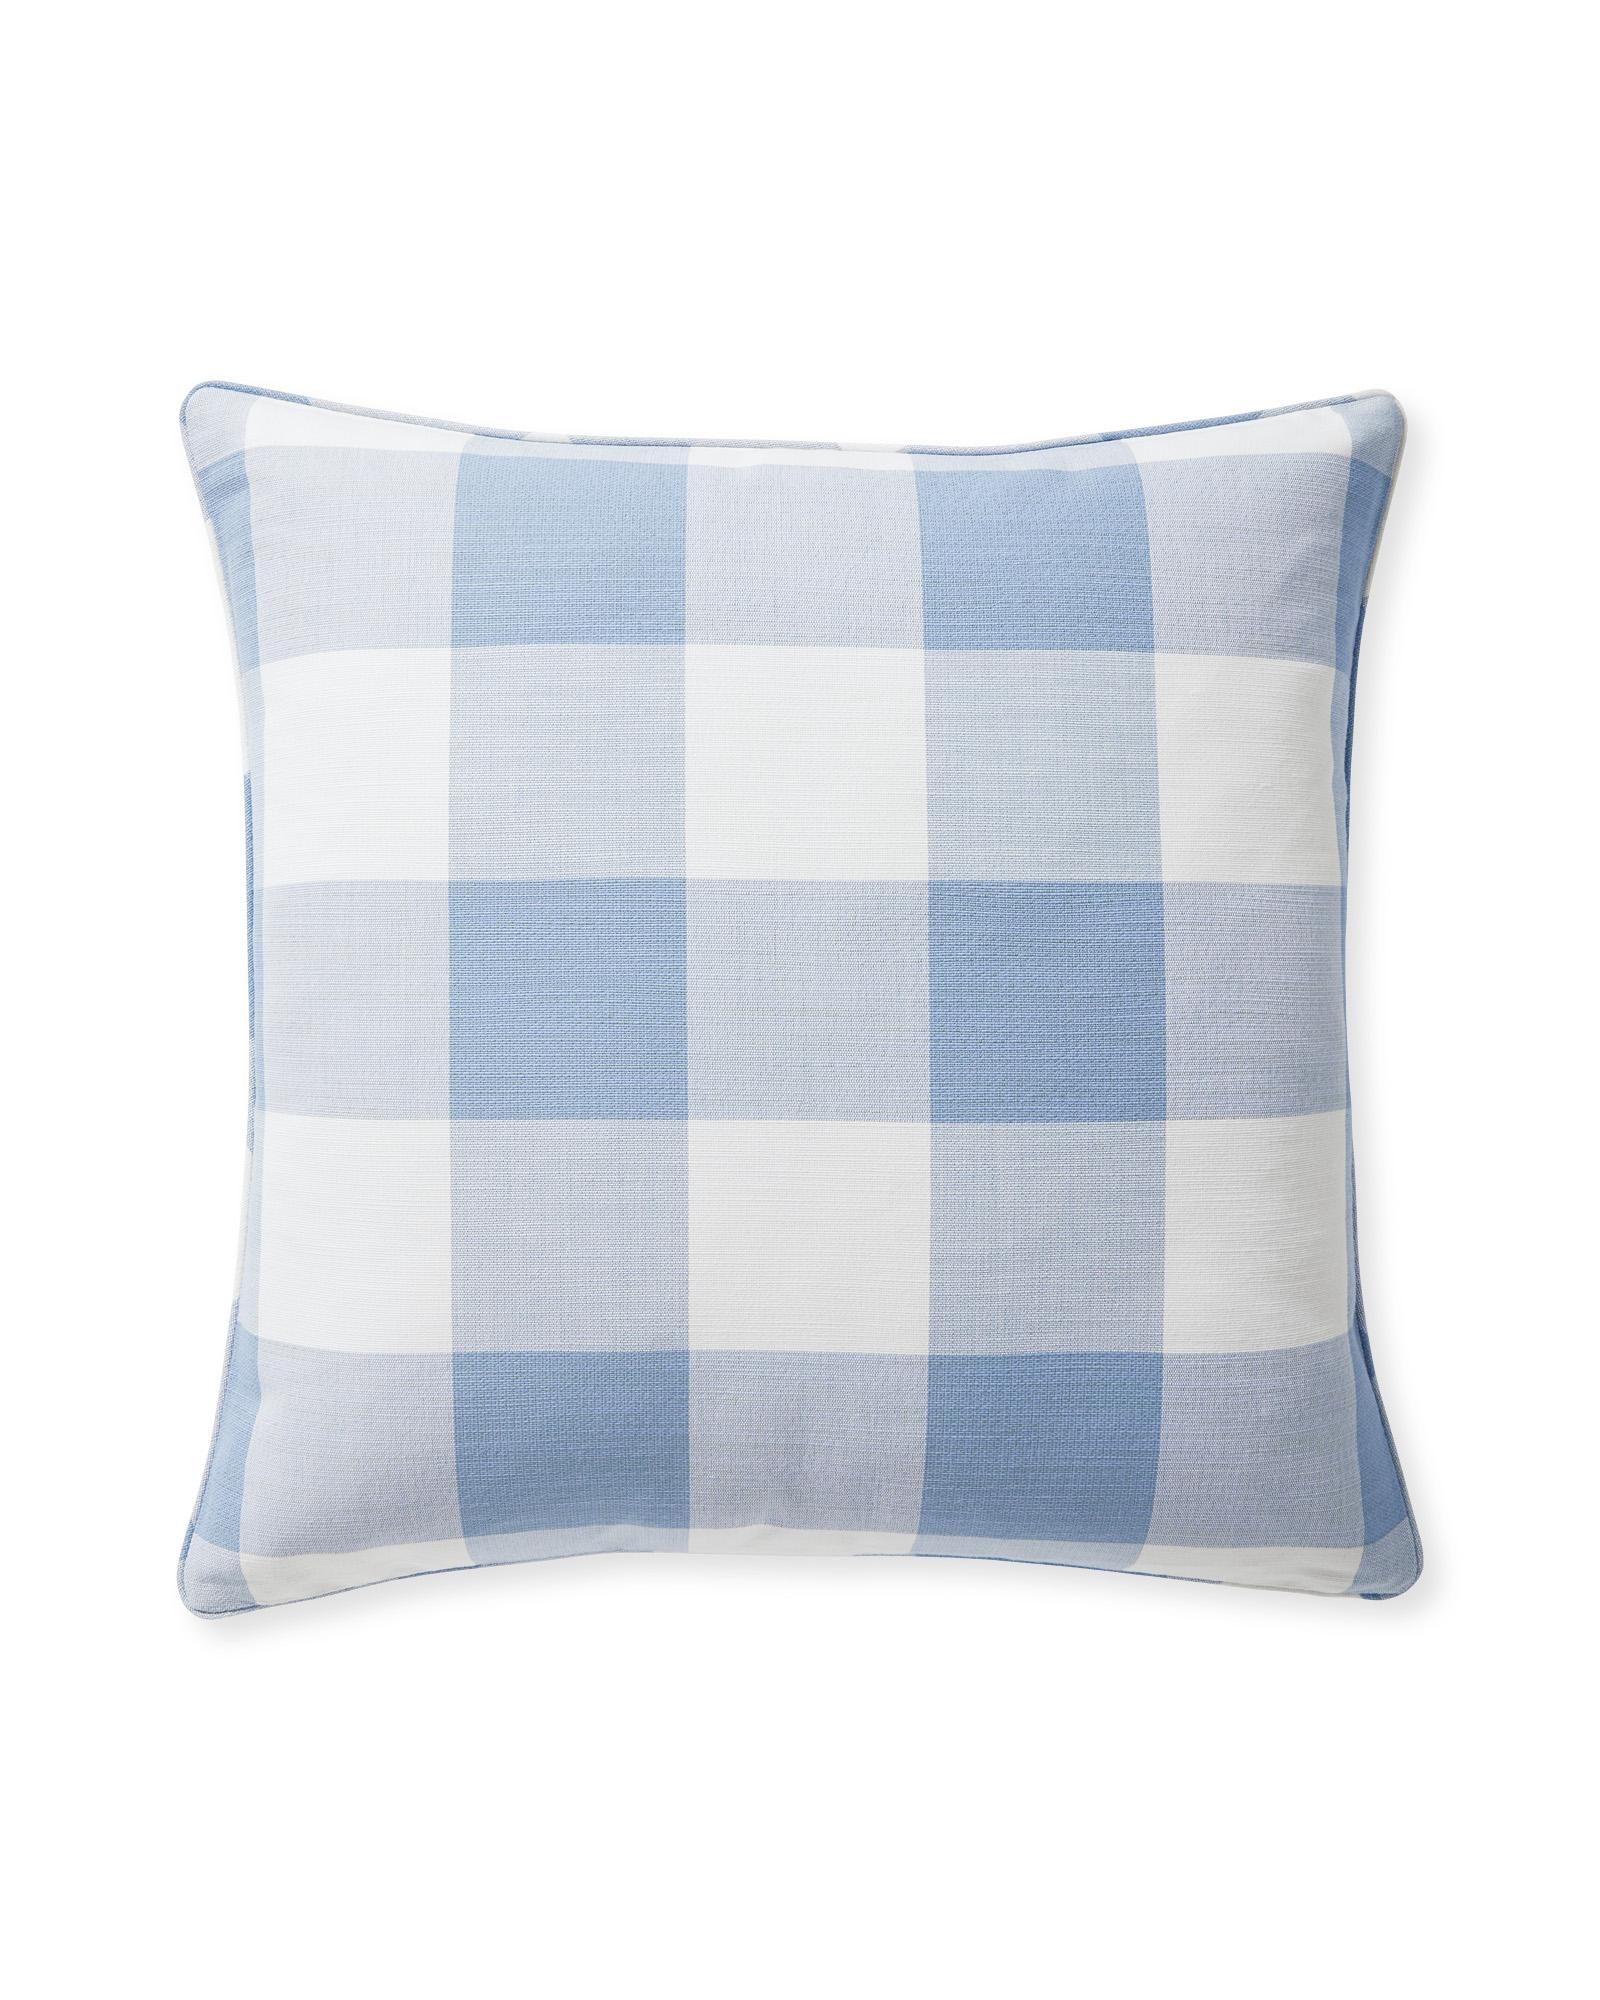 Perennials Gingham Pillow Cover | Serena and Lily